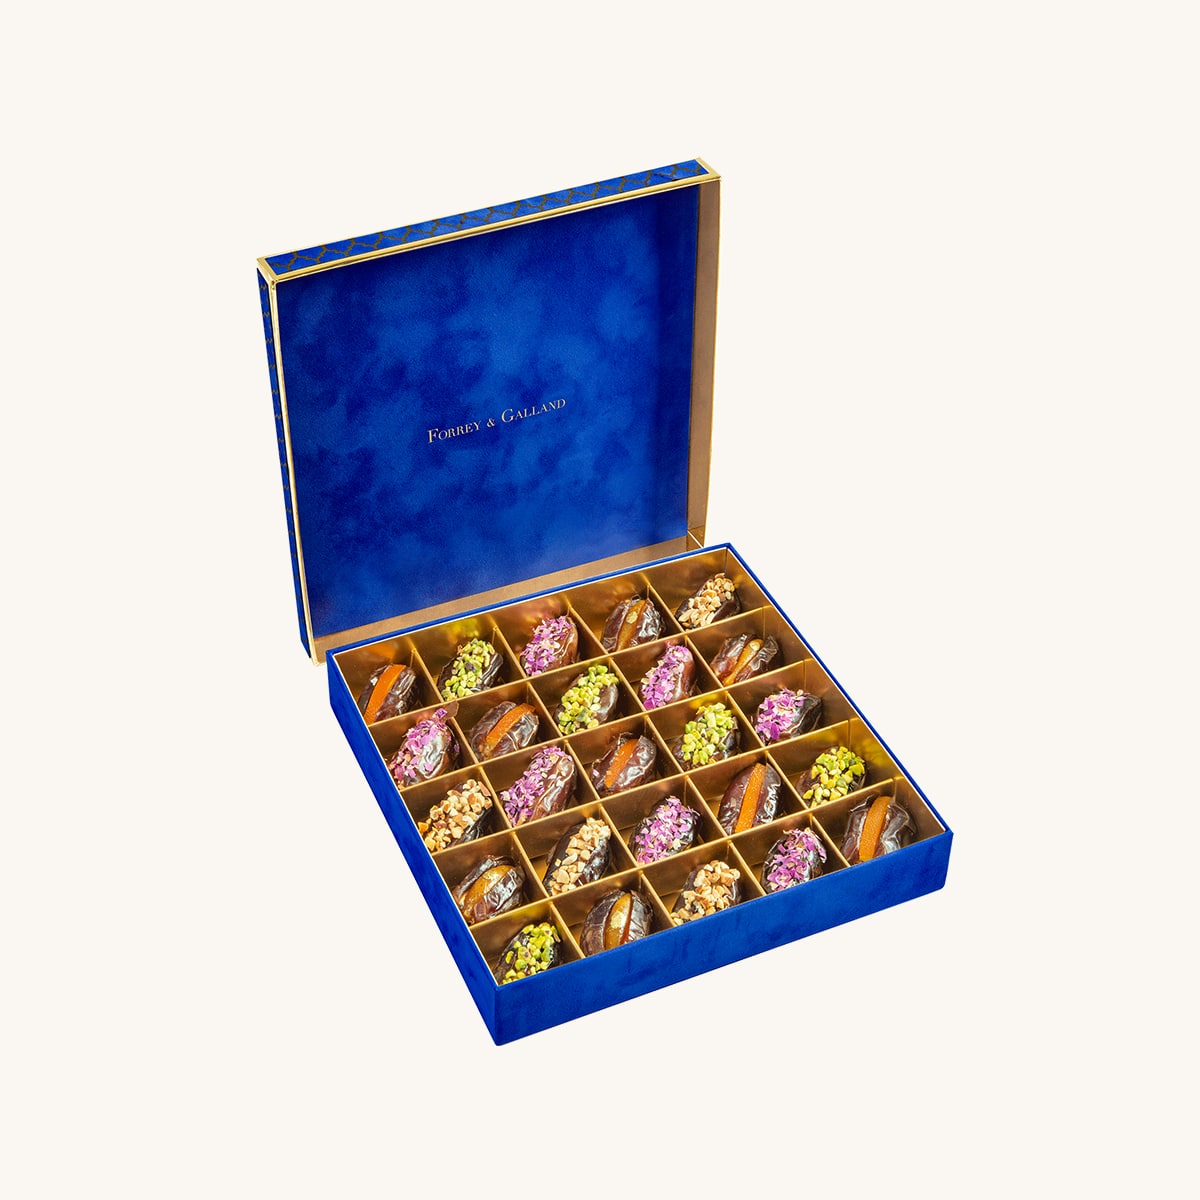 Forrey & Galland luxury velvet box filled with 25 pieces of premium dates